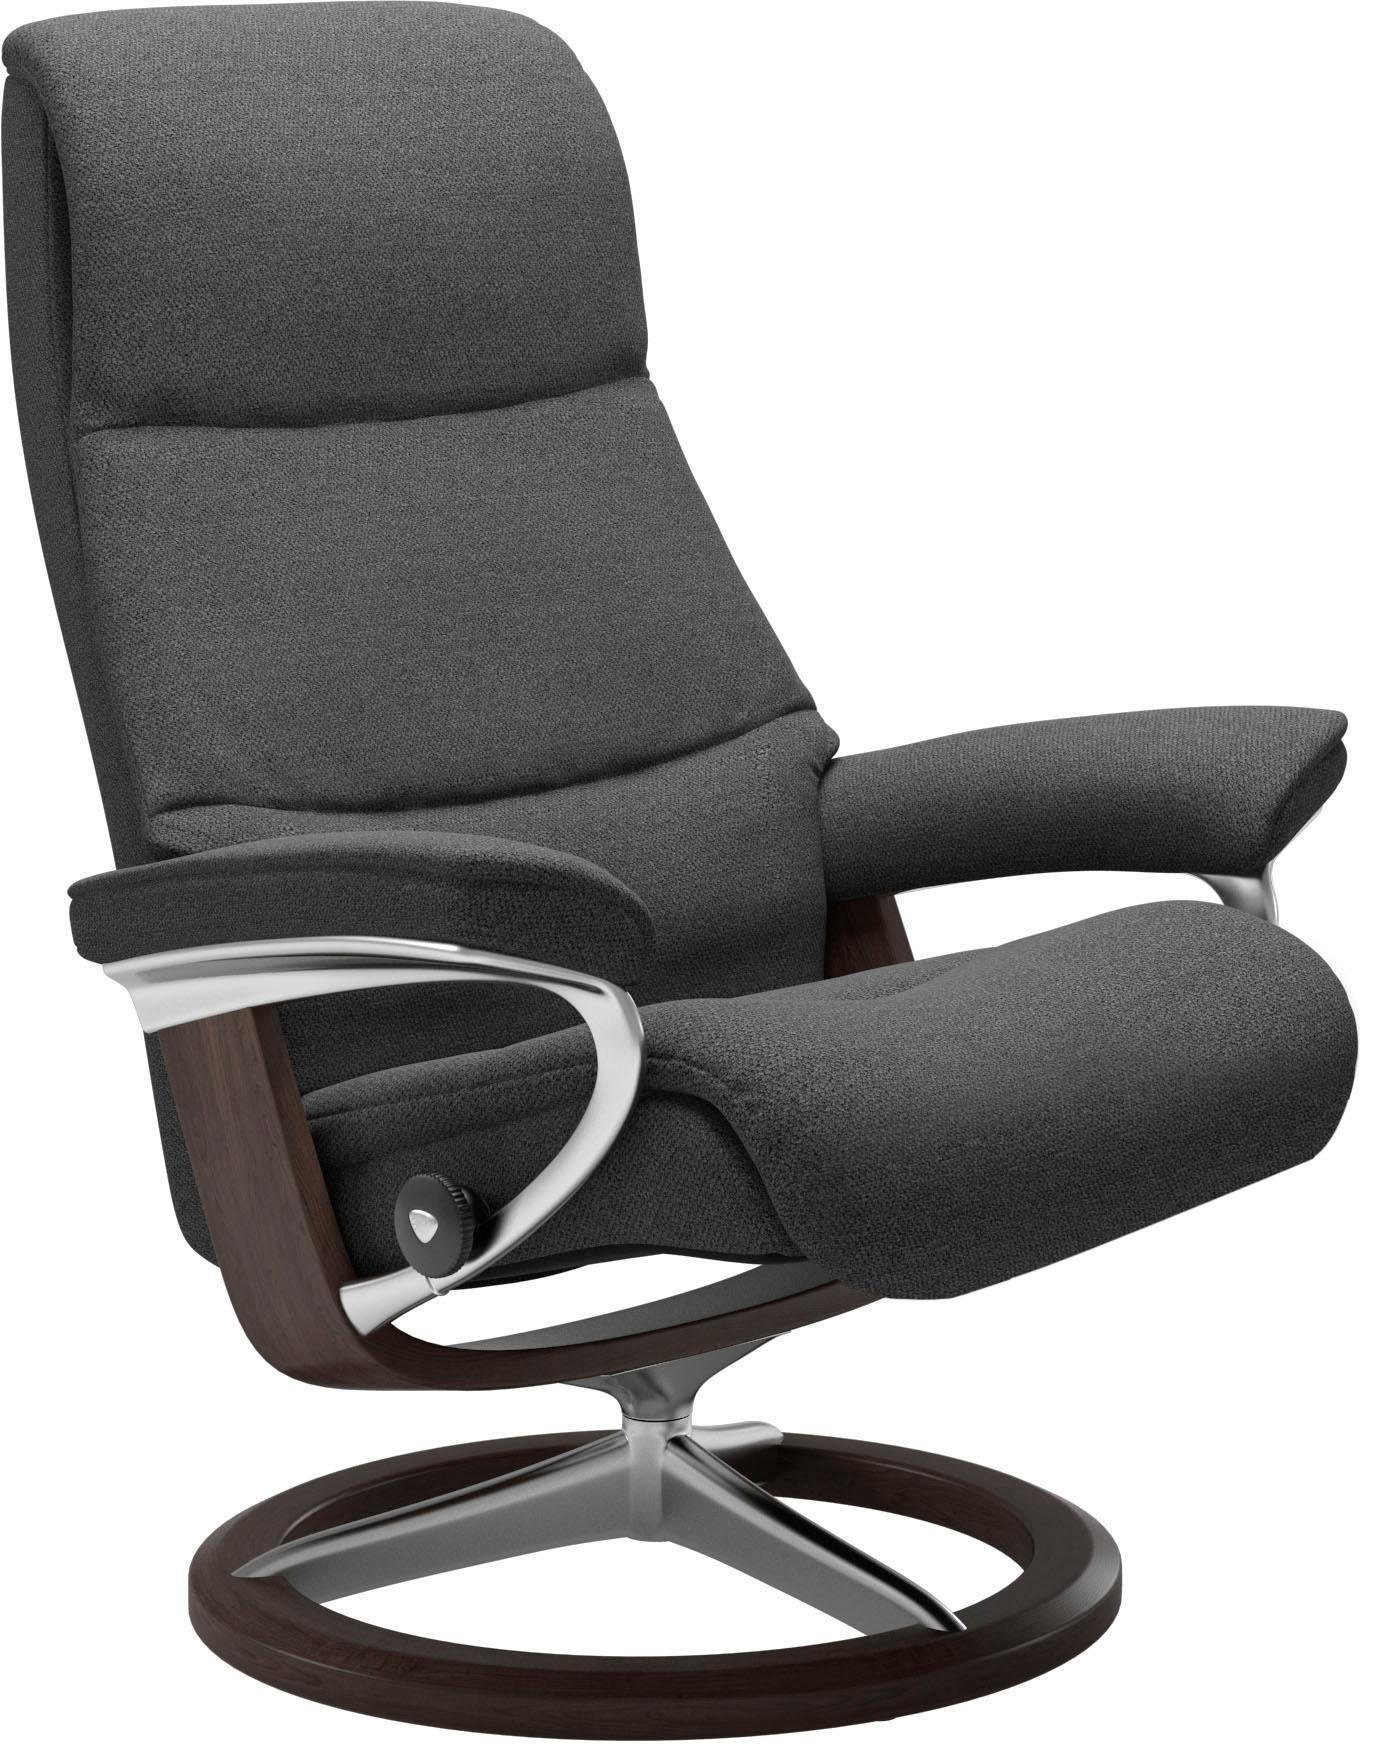 Größe Base, View, Signature S,Gestell Relaxsessel Wenge Stressless® mit